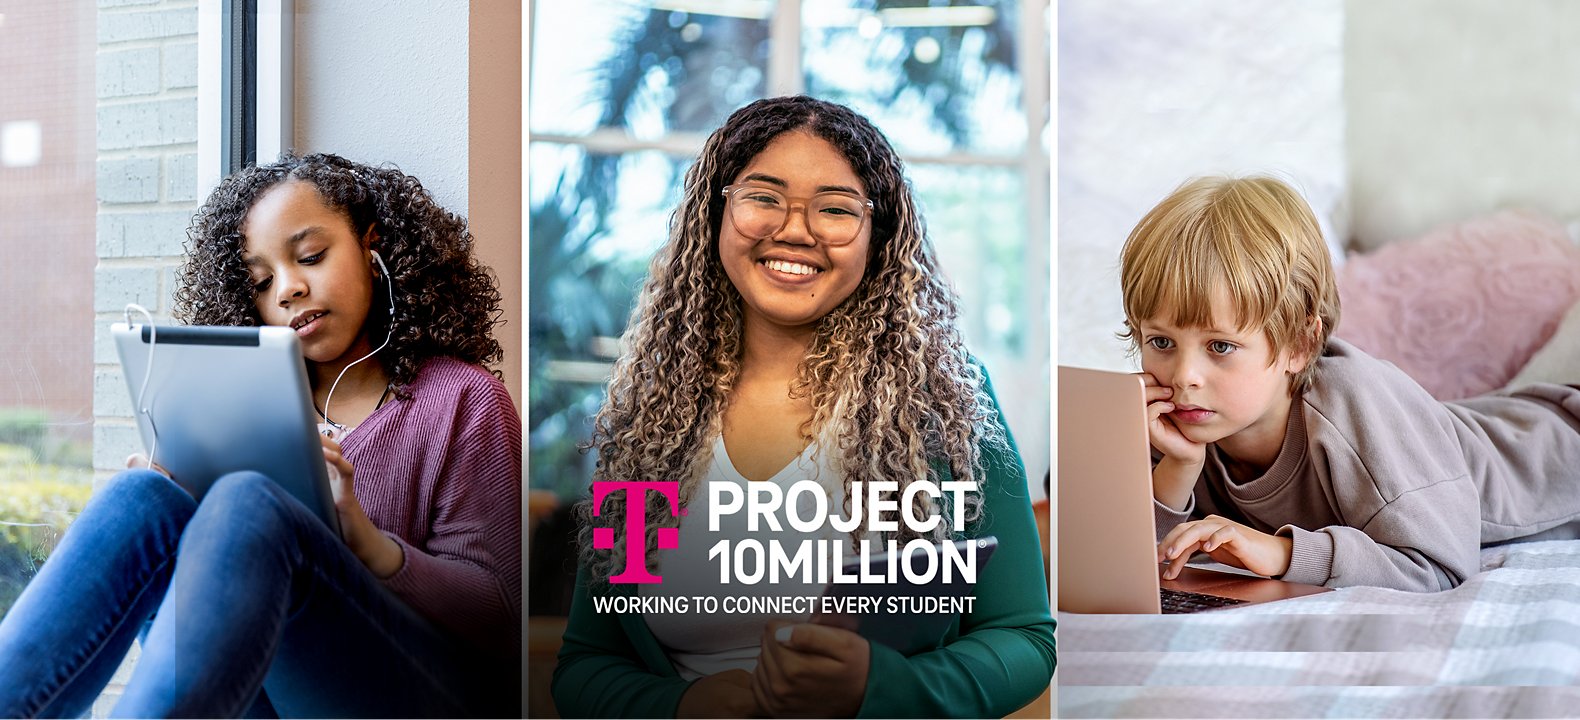 Project Ten Million. Working to connect every student. Child wearing earbuds and using a tablet at school, child standing in front of a window and smiling, child using a laptop while lying on their bed at home.